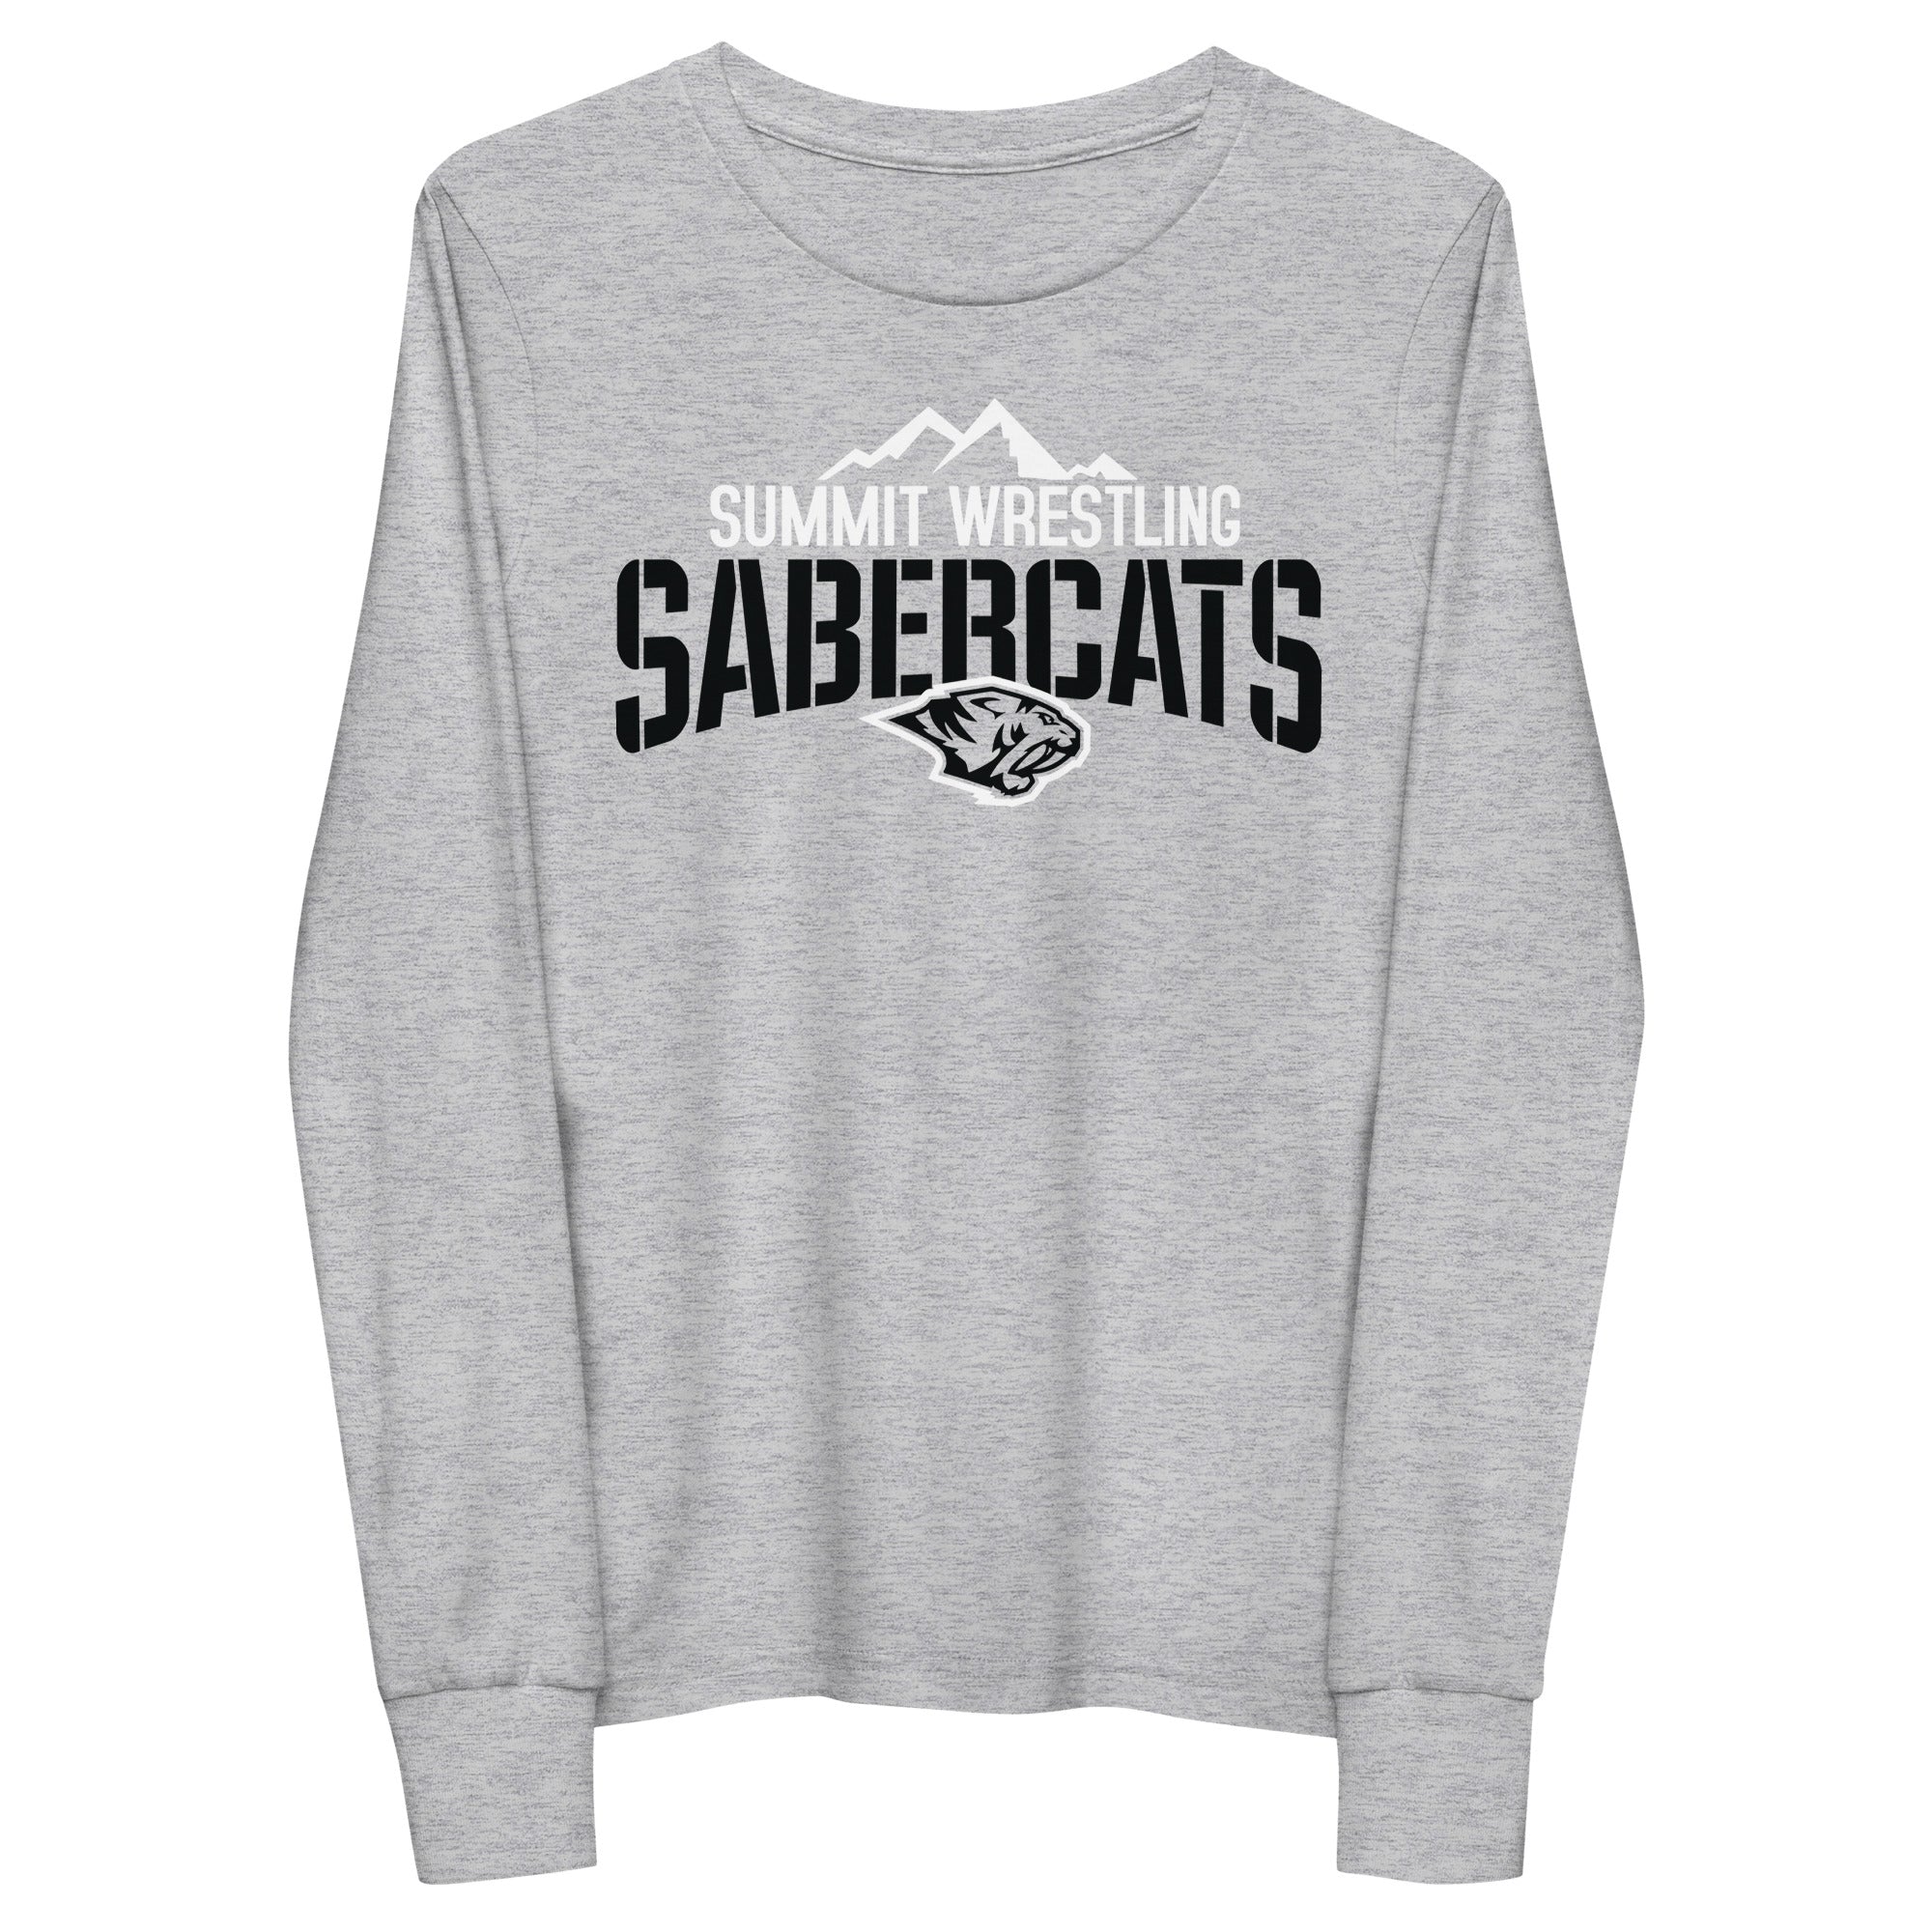 Summit Wrestling Sabercats Youth long sleeve tee